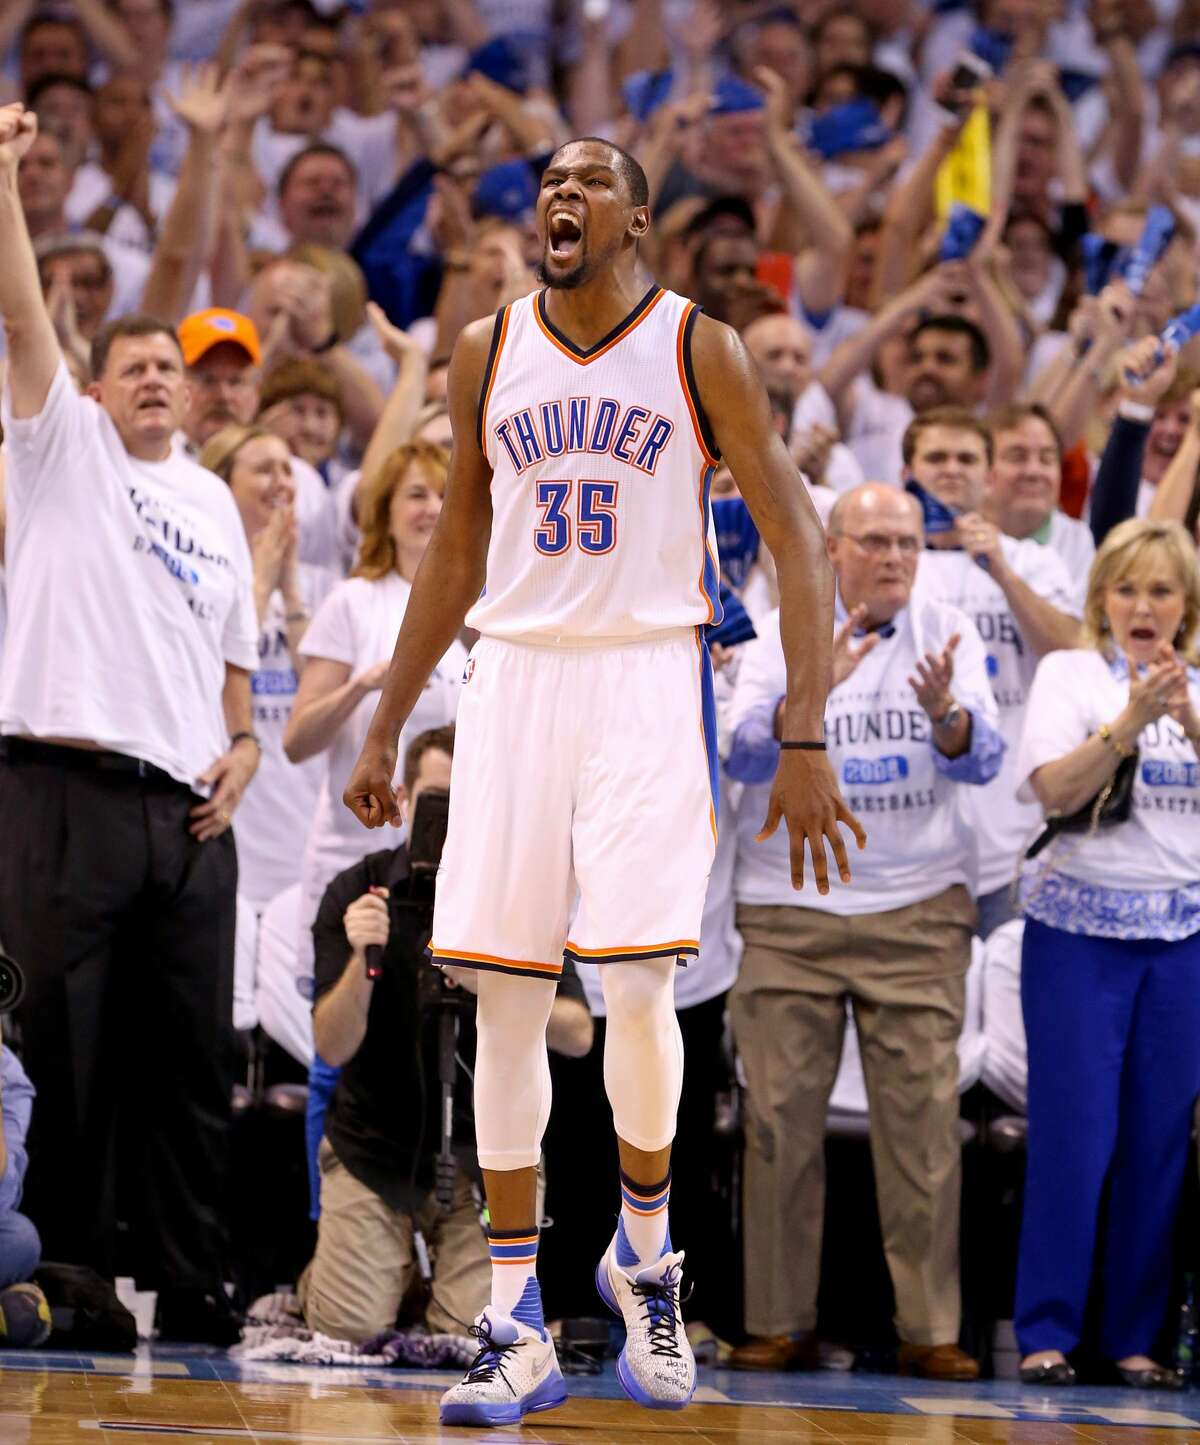 1. Kevin Durant went off The Thunder's All-Star forward matched his career high with 41 points and he personally outscored the Spurs 17-16 in the fourth quarter. Several of the shots were contested by NBA Defensive Player of the Year Kawhi Leonard, but Durant outplayed him Sunday night. Heck, even drew his first charging call of the season when Leonard ran over him en route to the basket.